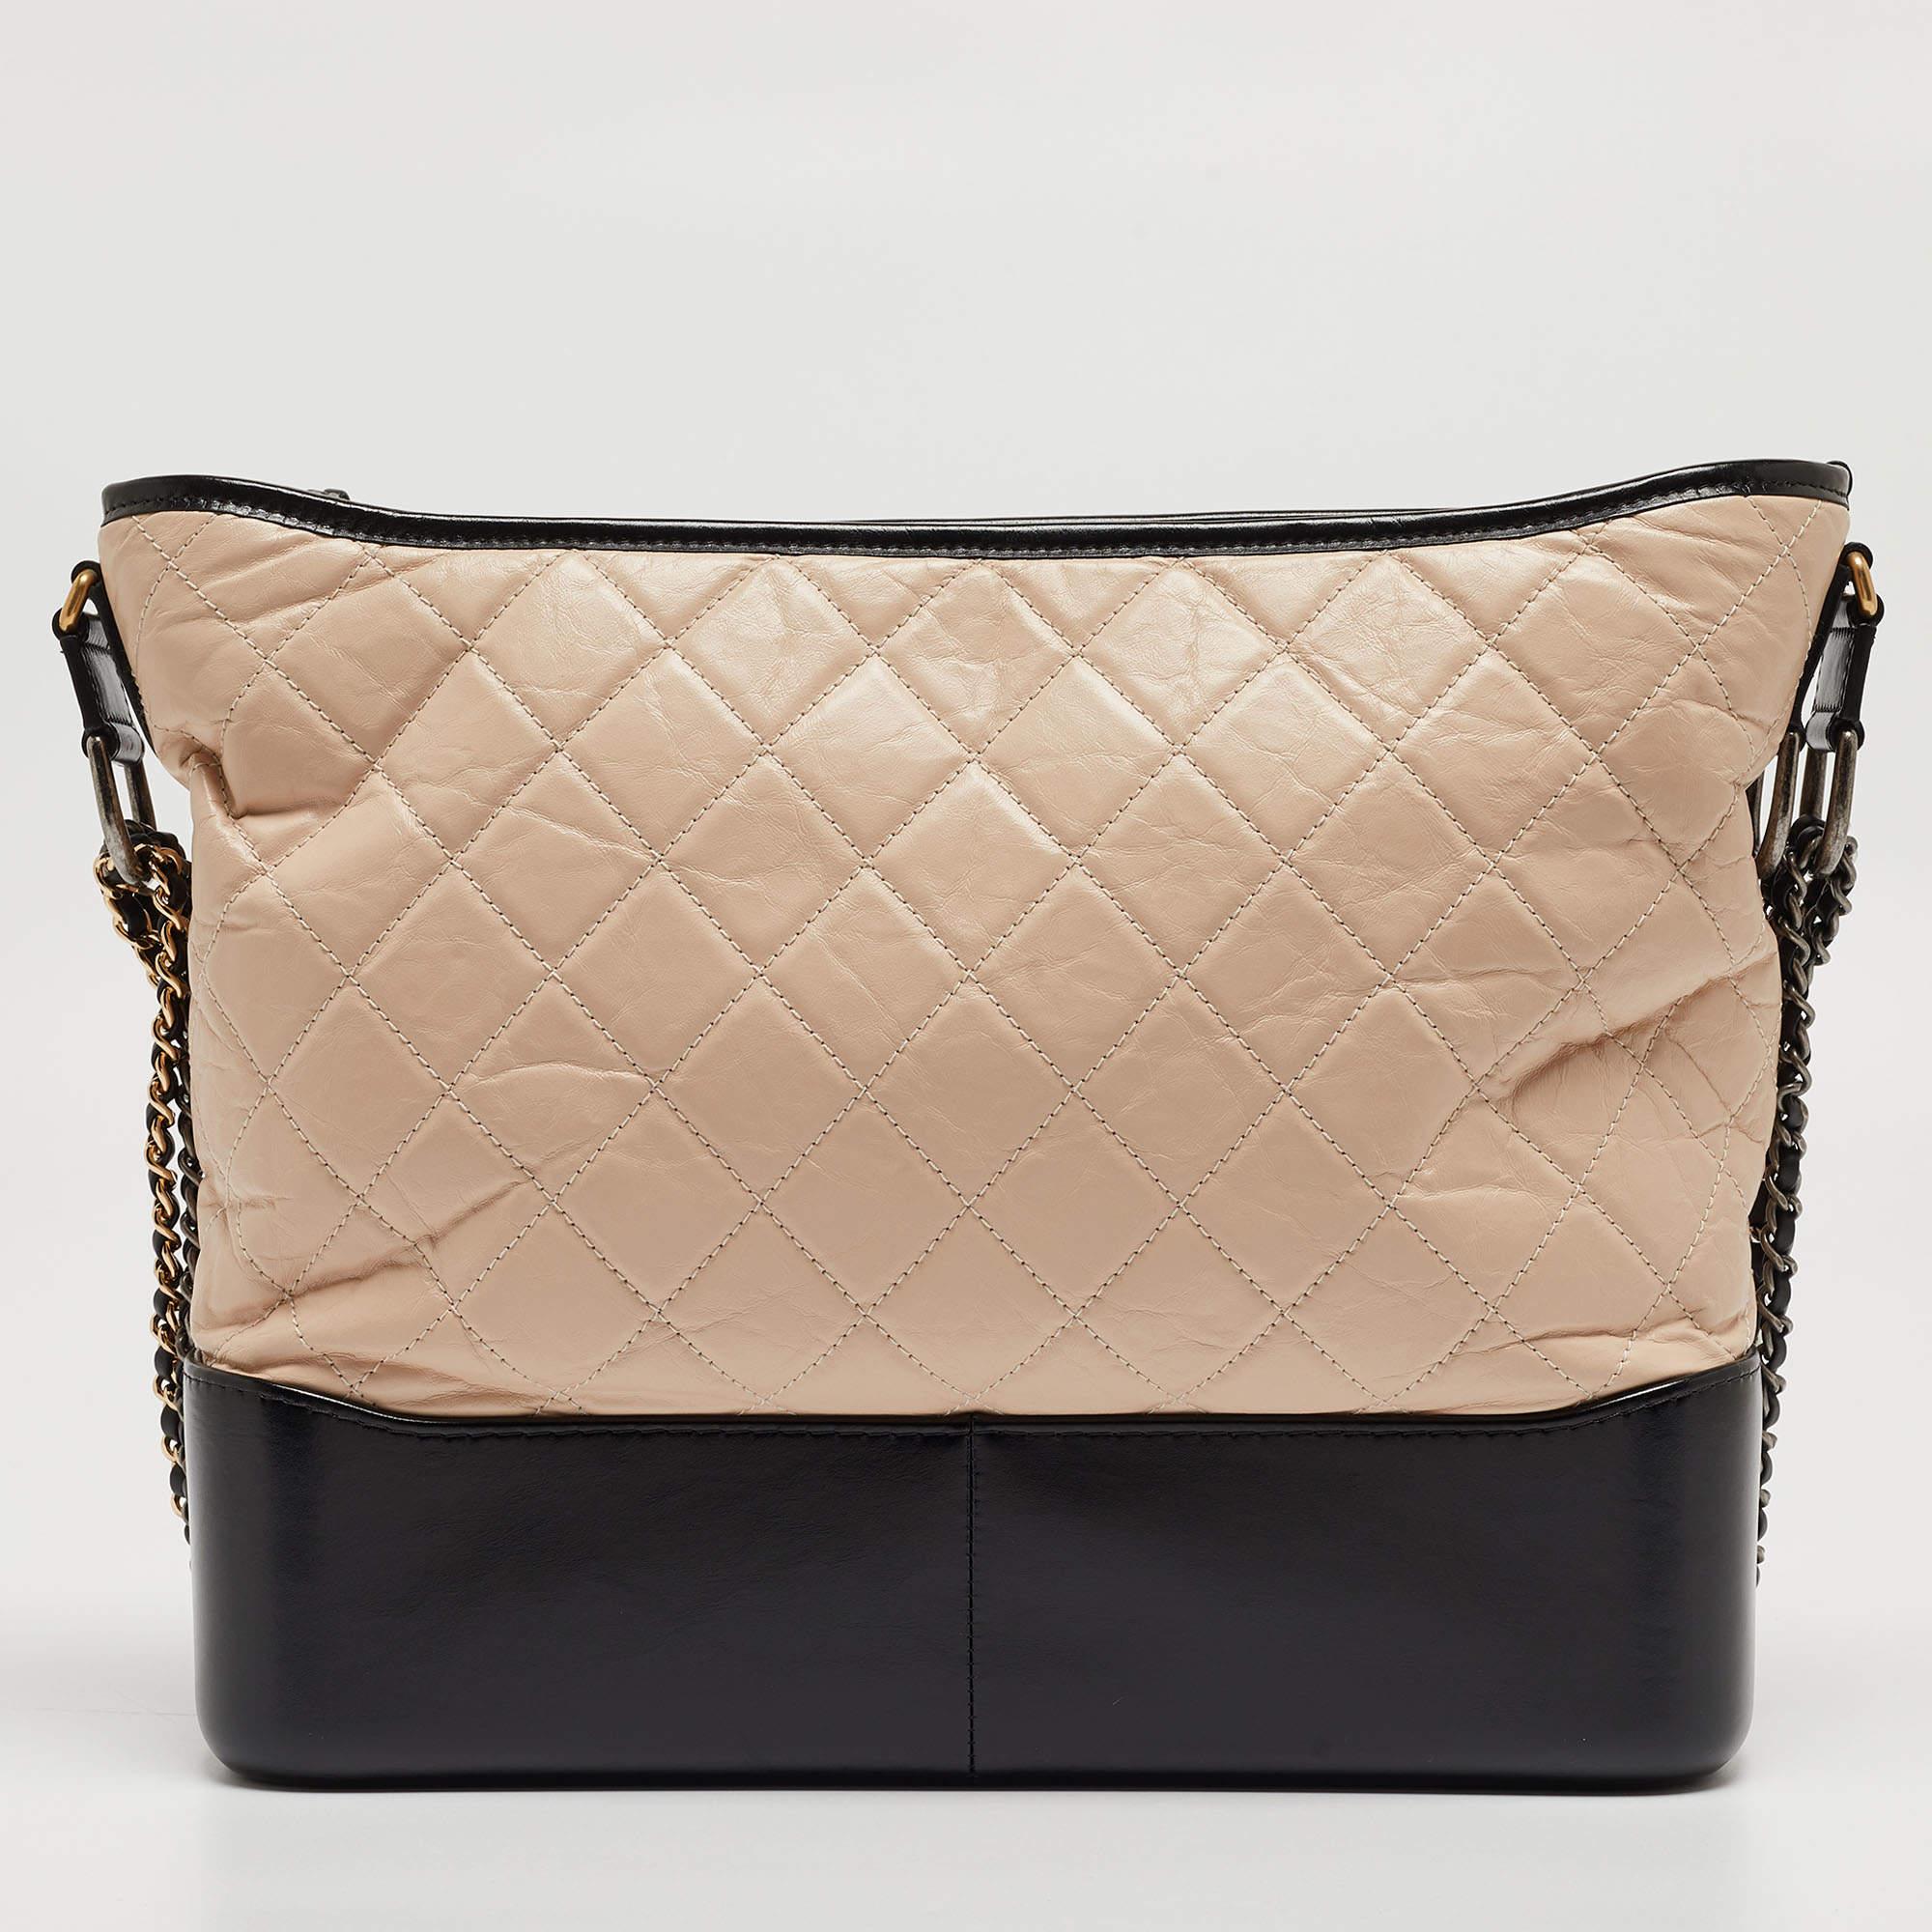 Embrace timeless allure with the Chanel Gabrielle hobo. Crafted with meticulous attention to detail, this hobo bag boasts a classic quilted leather design in contrasting hues, exuding effortless chic. Its spacious interior and adjustable strap offer